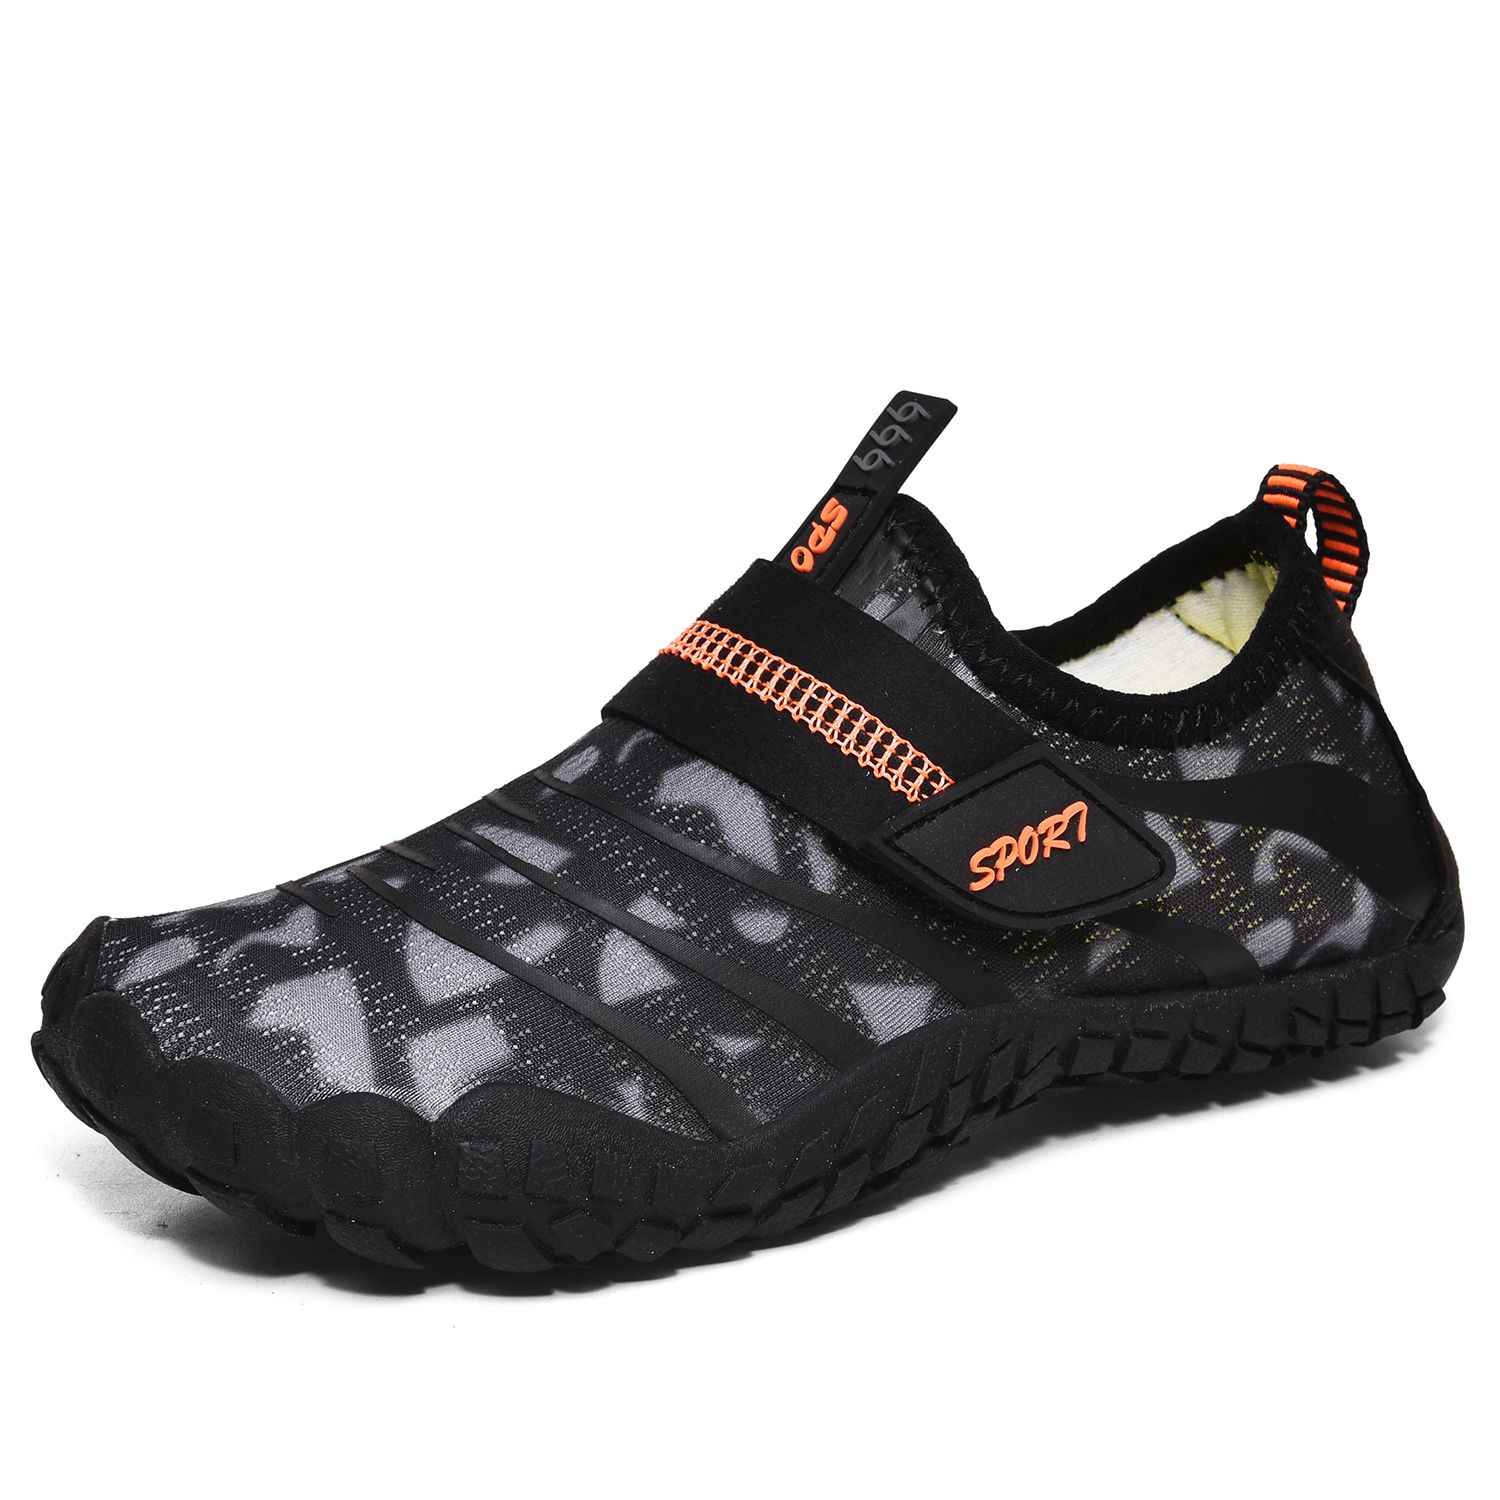 webbed water shoes